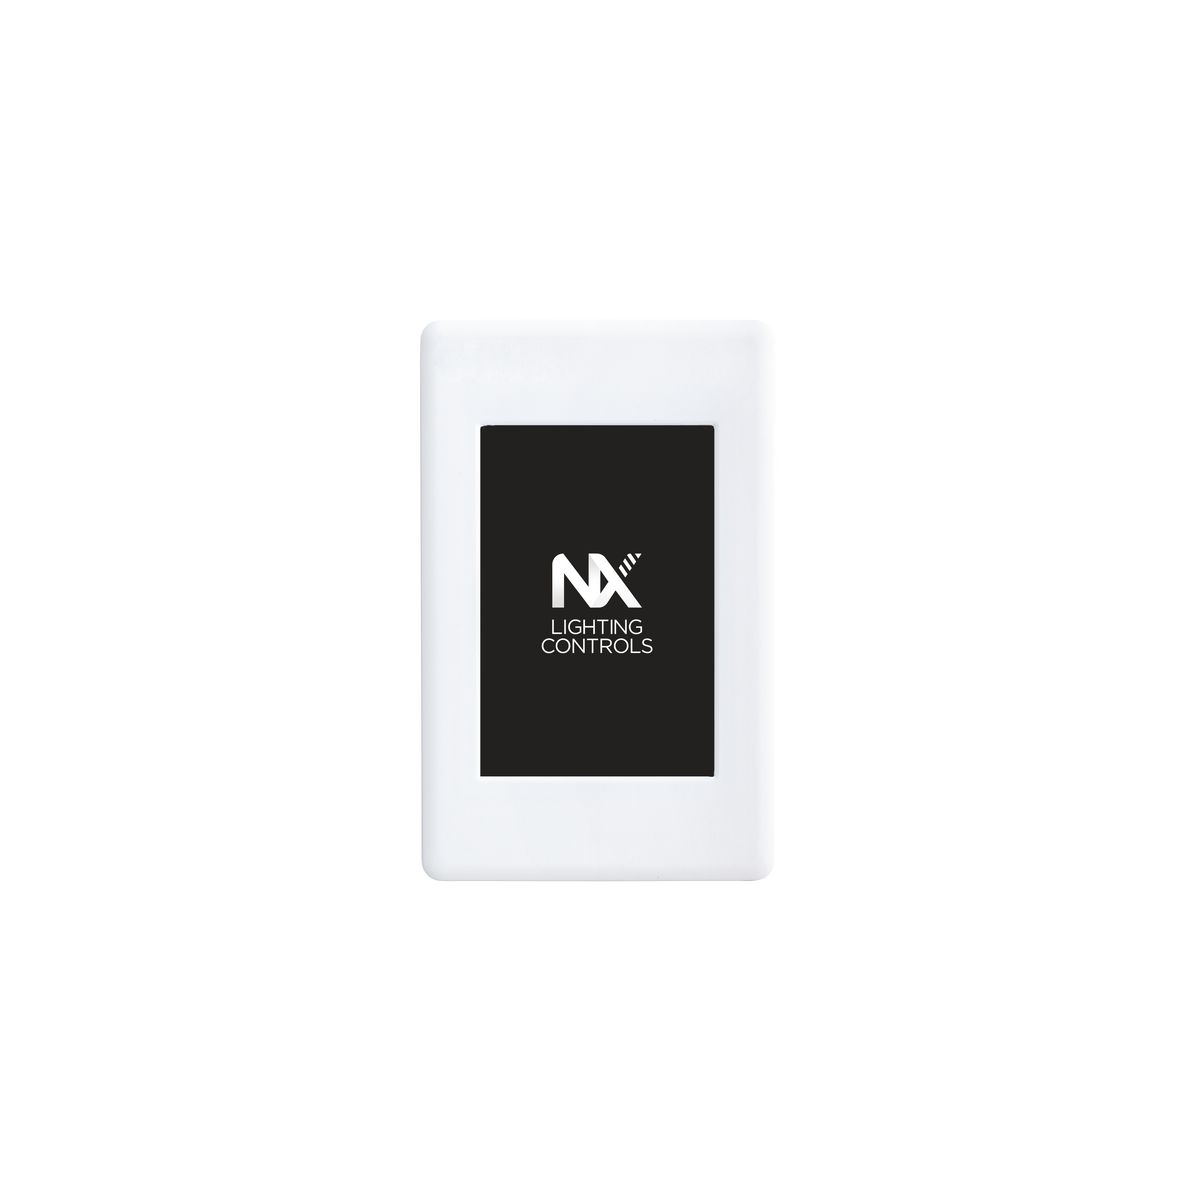 NX SIMPLE TOUCH WALL STATION BEZEL KIT